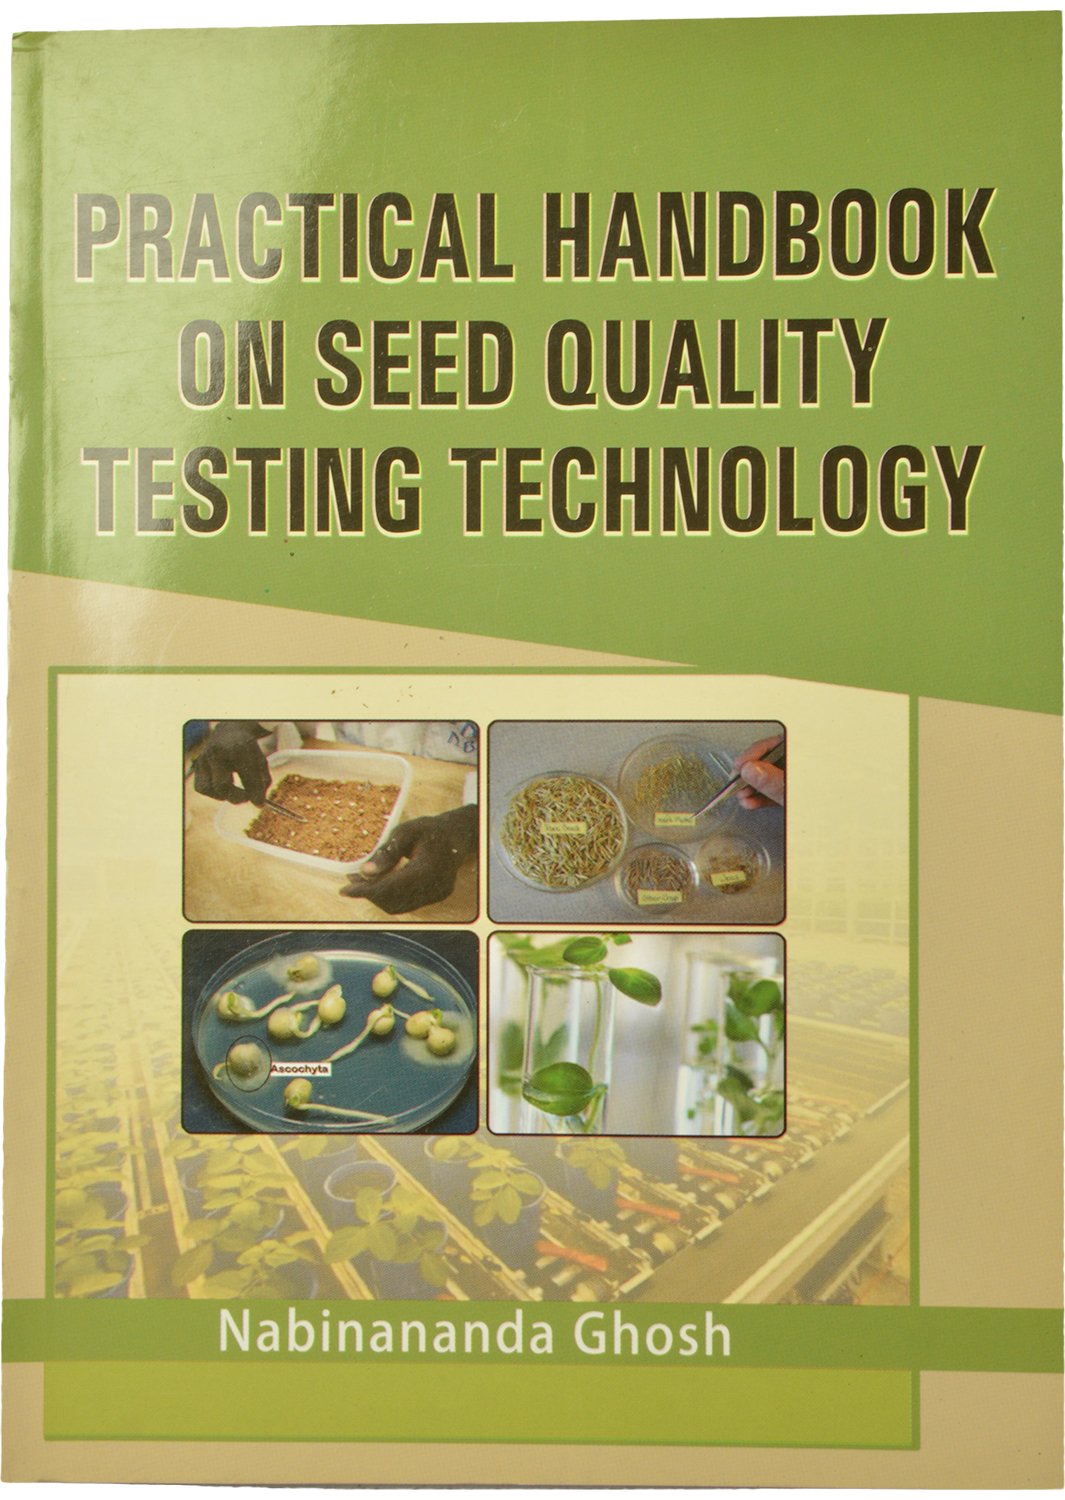 Practical Handbook on Seed Quality Testing Technology